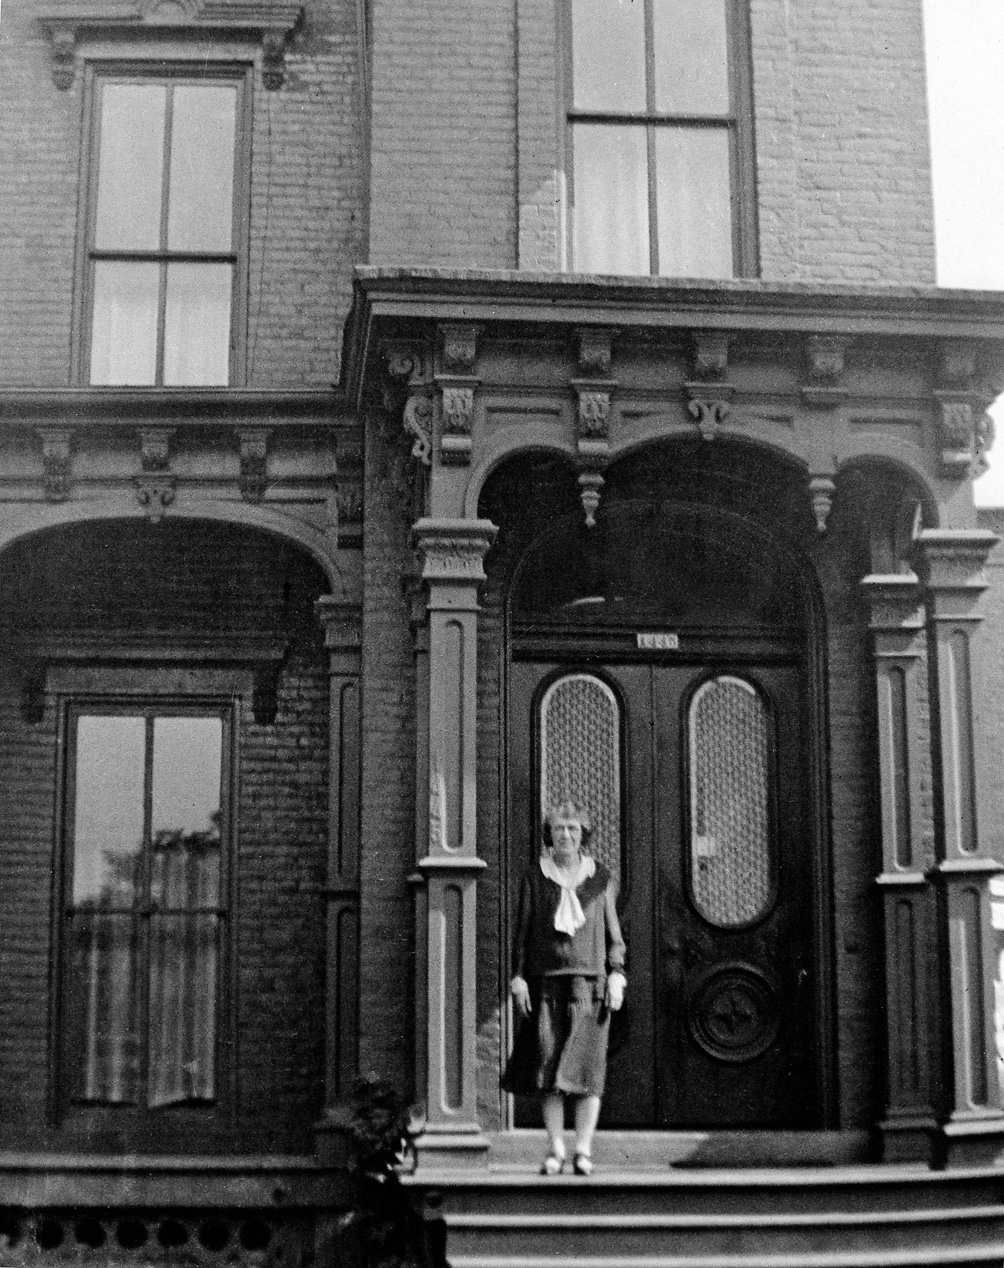 Great-Grandmother Margaret Mary Cox at her home at 1445 West Lafayette Street, Detroit. A fast food restaurant now occupies the site. Photo about 1935 by unknown photographer. Margaret Cox was born in 1880 in Beaver Falls, Pennsylvania. View full size.